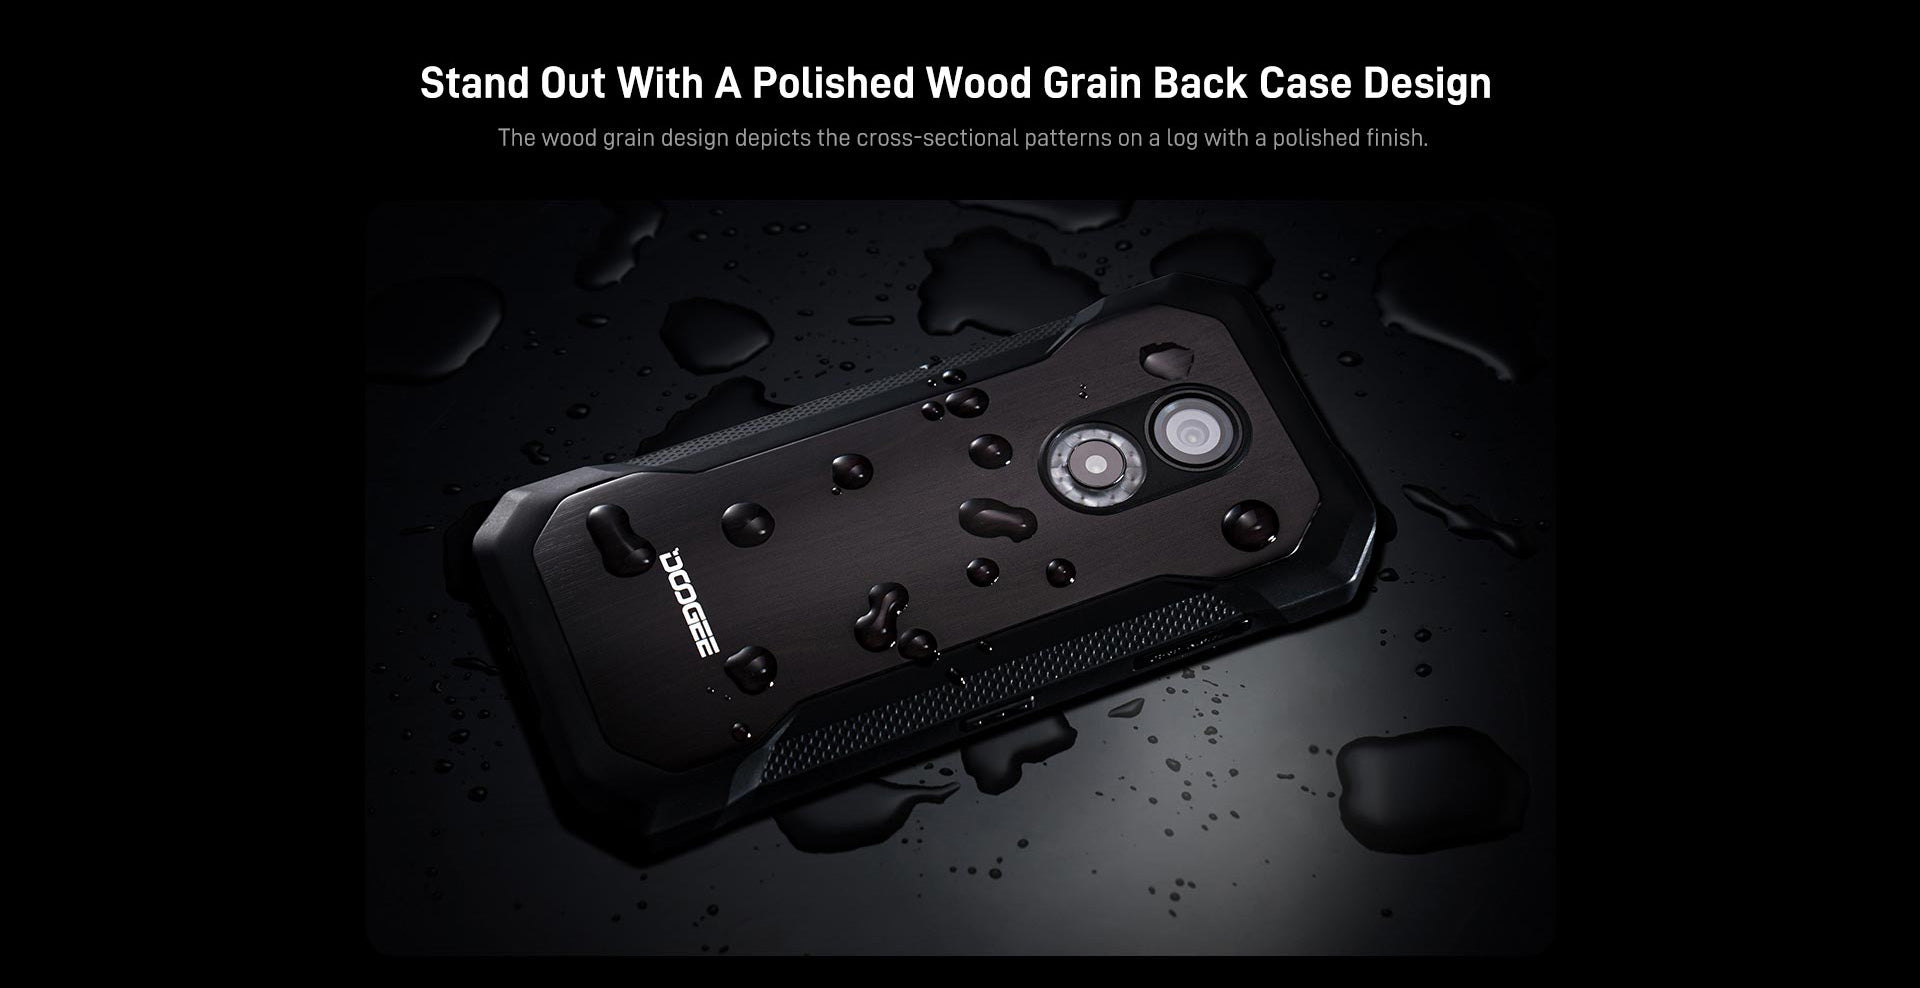 Stand Out With A Polished Wood Grain Back Case Design